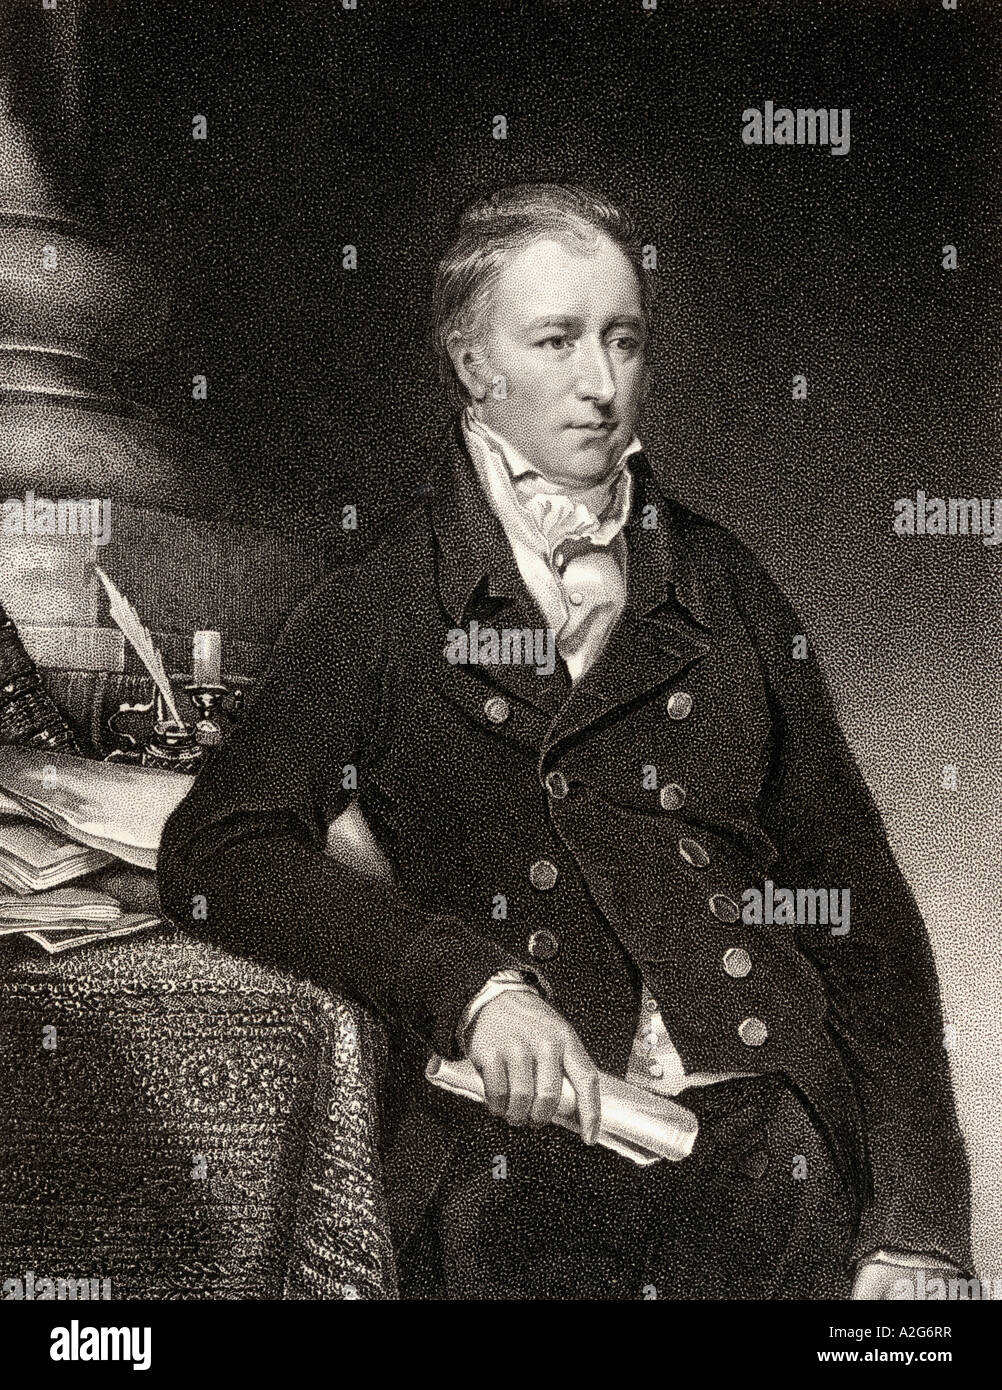 Henry Lascelles, Viscount Lascelles, 2nd Earl of Harewood, 1767 - 1841.  British politician and slave owner. Stock Photo